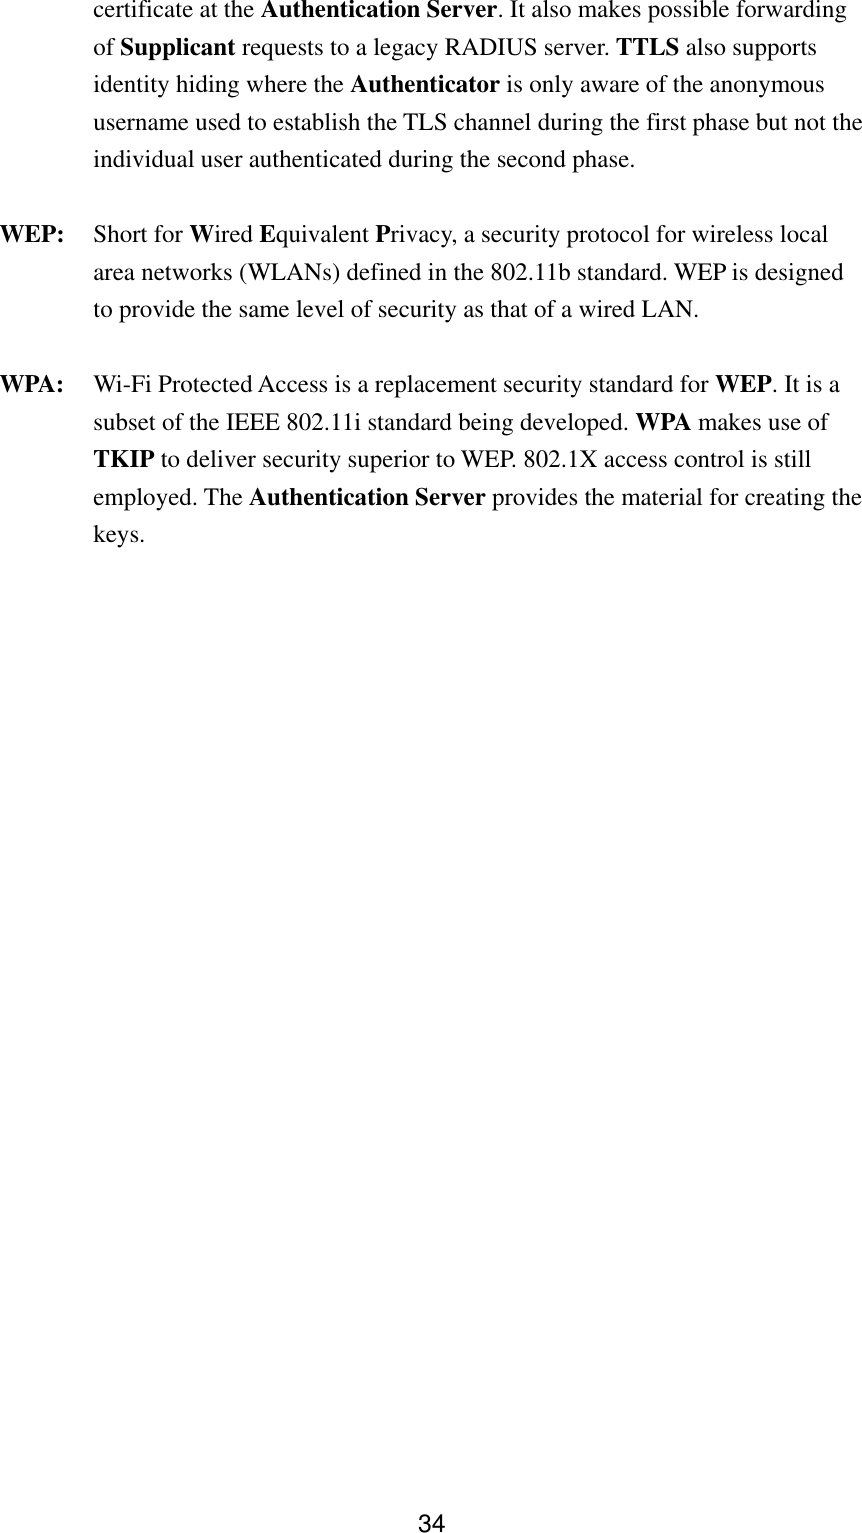  34certificate at the Authentication Server. It also makes possible forwarding of Supplicant requests to a legacy RADIUS server. TTLS also supports identity hiding where the Authenticator is only aware of the anonymous username used to establish the TLS channel during the first phase but not the individual user authenticated during the second phase. WEP: Short for Wired Equivalent Privacy, a security protocol for wireless local area networks (WLANs) defined in the 802.11b standard. WEP is designed to provide the same level of security as that of a wired LAN. WPA:  Wi-Fi Protected Access is a replacement security standard for WEP. It is a subset of the IEEE 802.11i standard being developed. WPA makes use of TKIP to deliver security superior to WEP. 802.1X access control is still employed. The Authentication Server provides the material for creating the keys. 